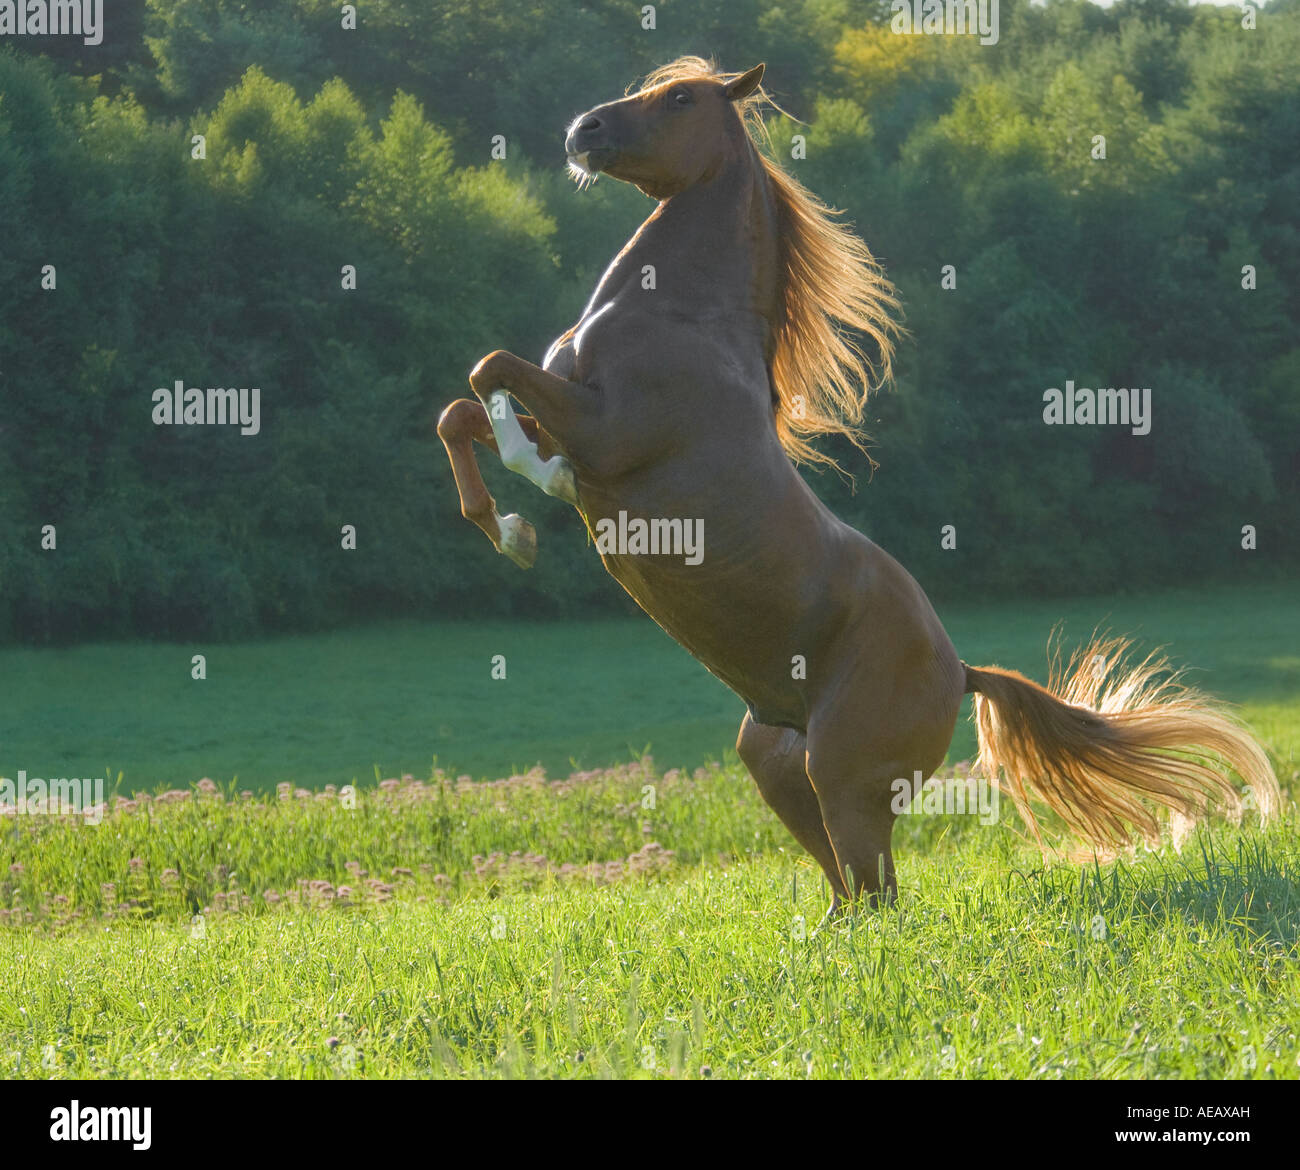 Andalusian stallion rearing up in meadow setting Stock Photo